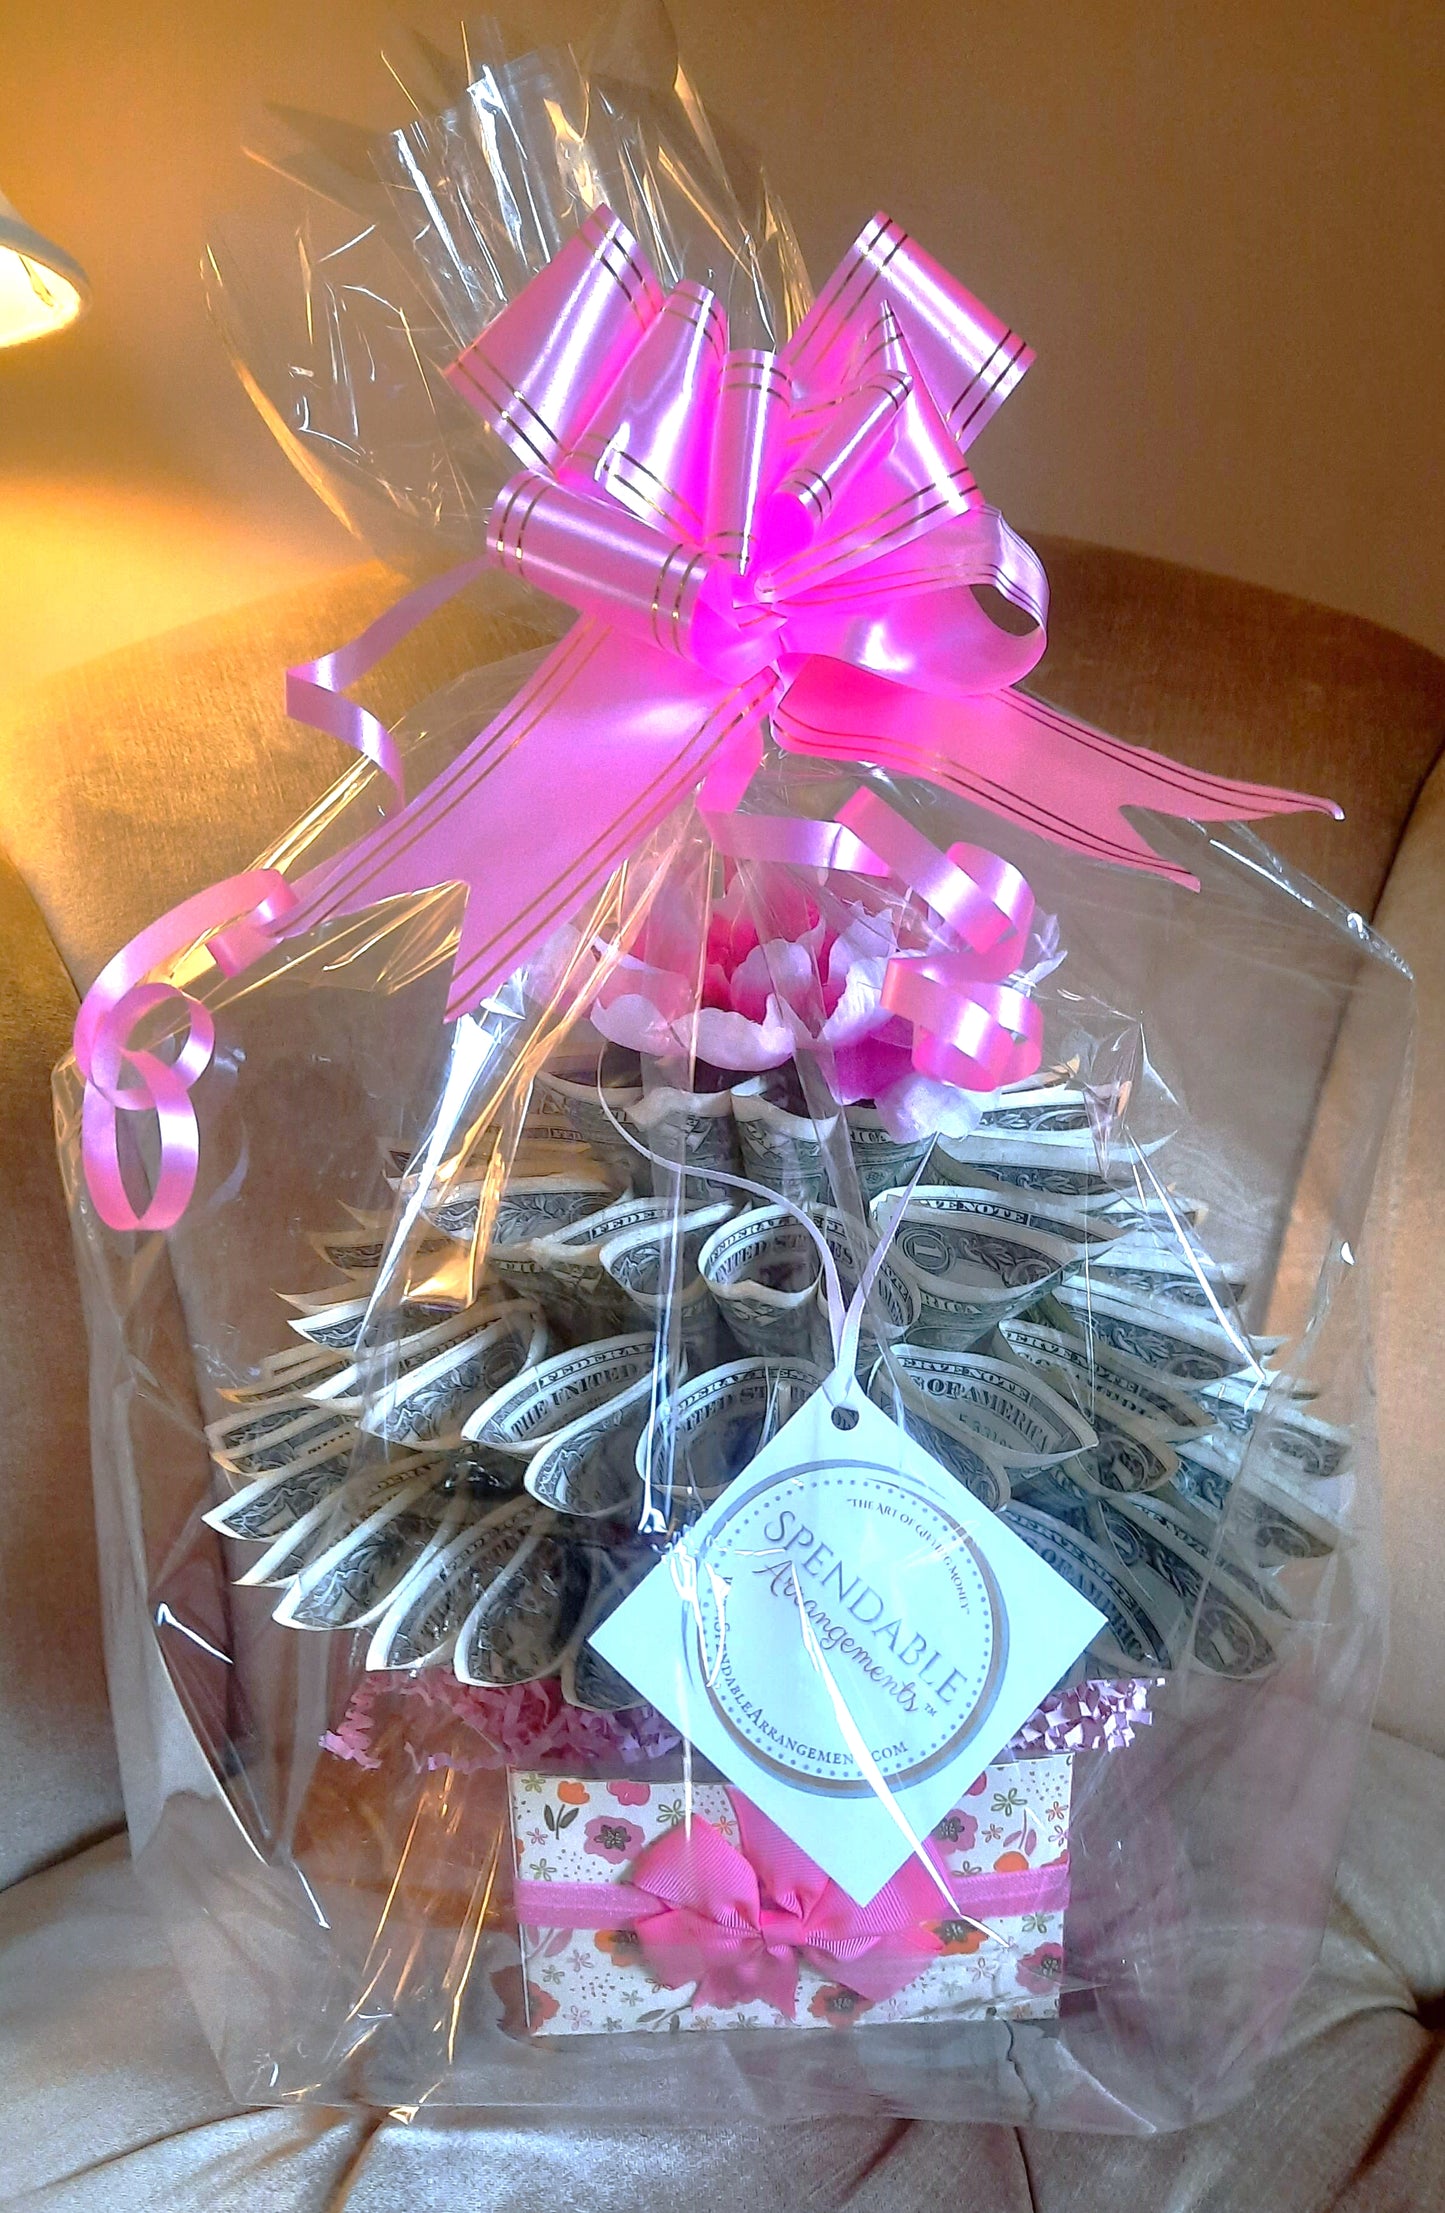 Real Money Bouquet Birthday gift by Spendable Arrangements